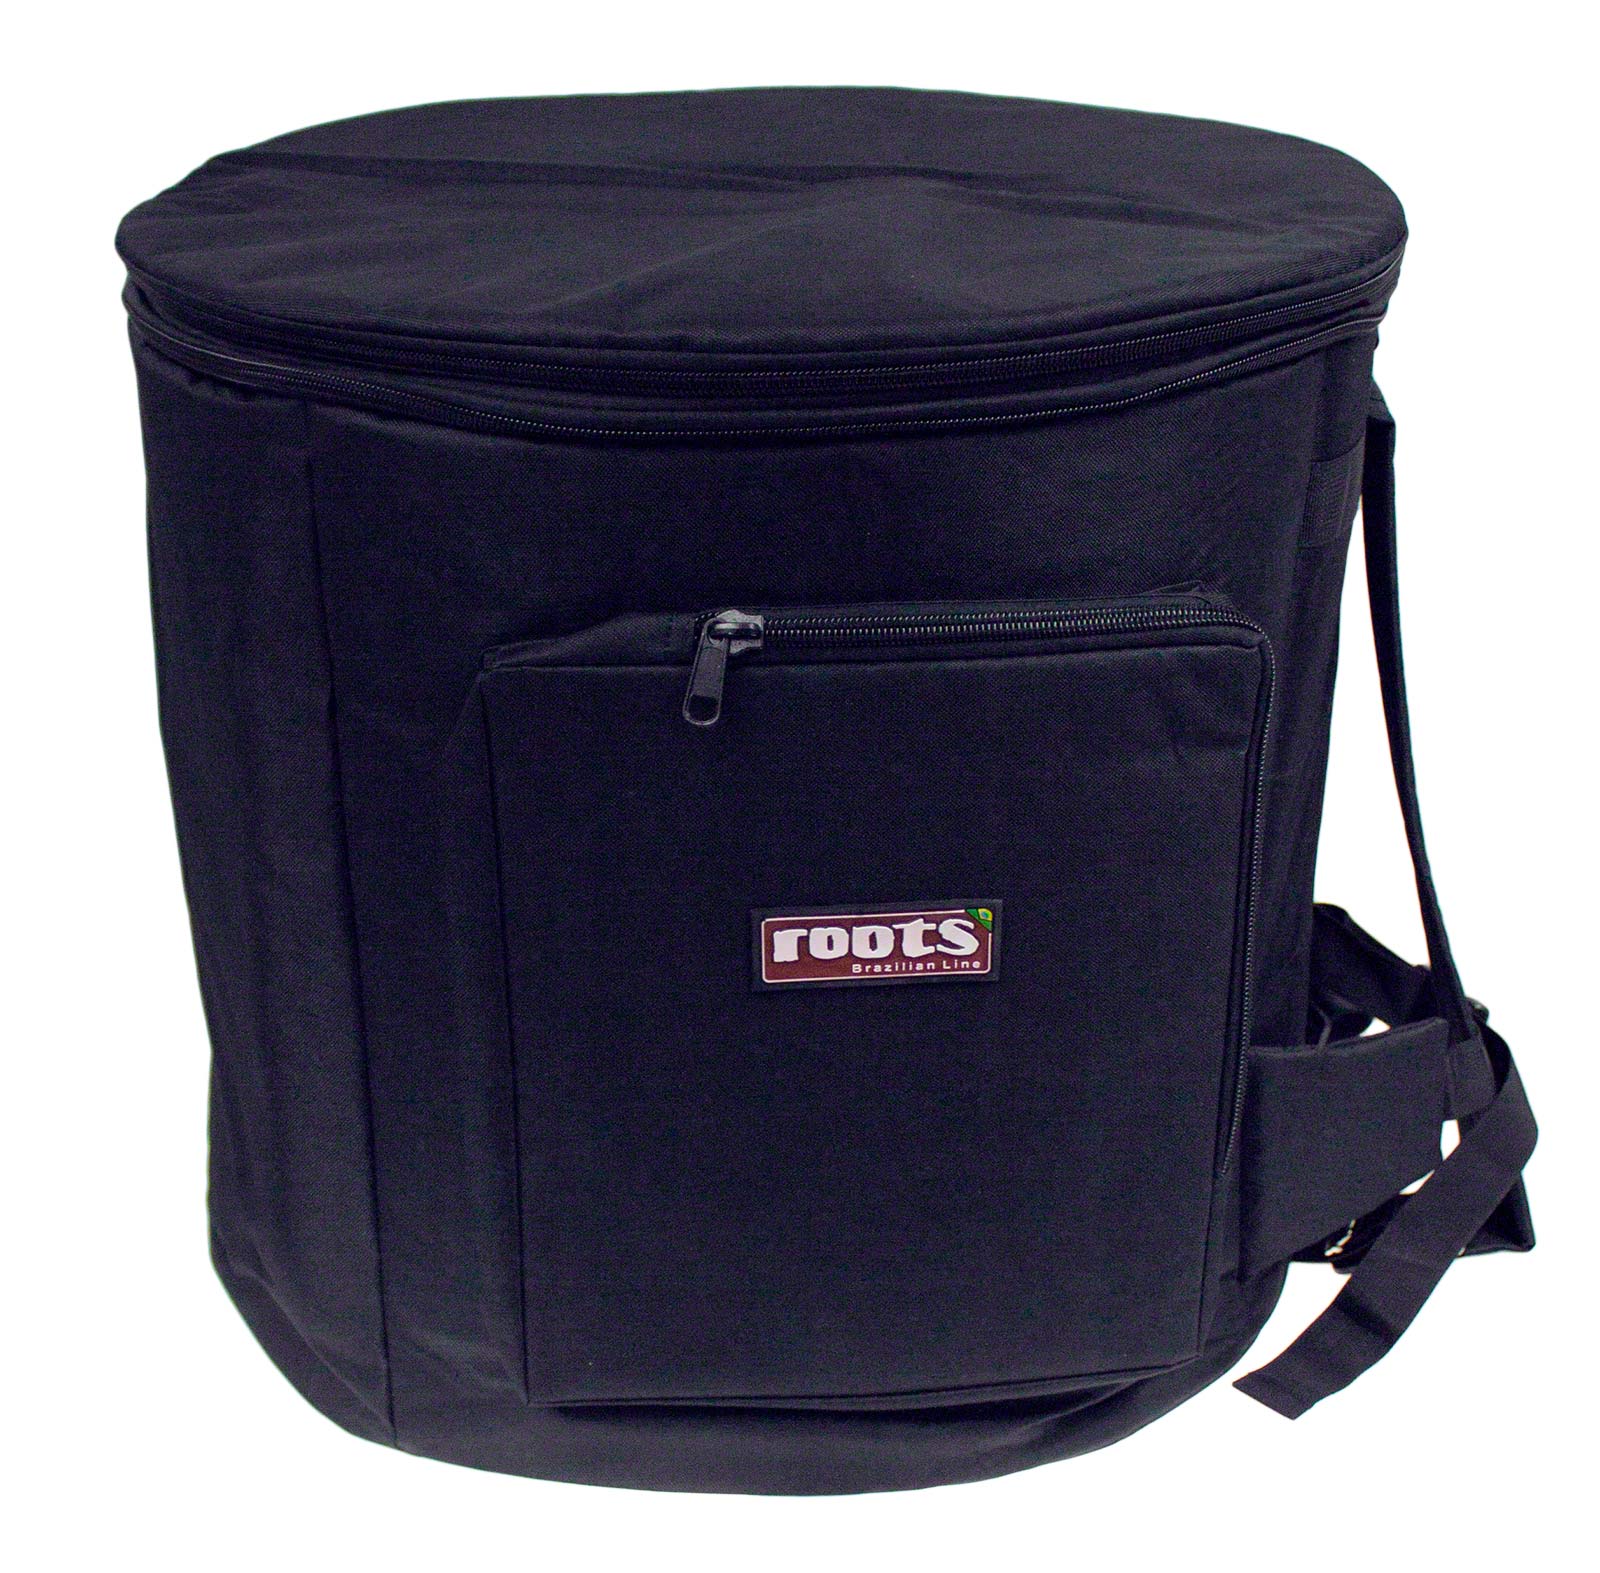 ROOTS PERCUSSION HOUSSE DELUXE SURDO 20